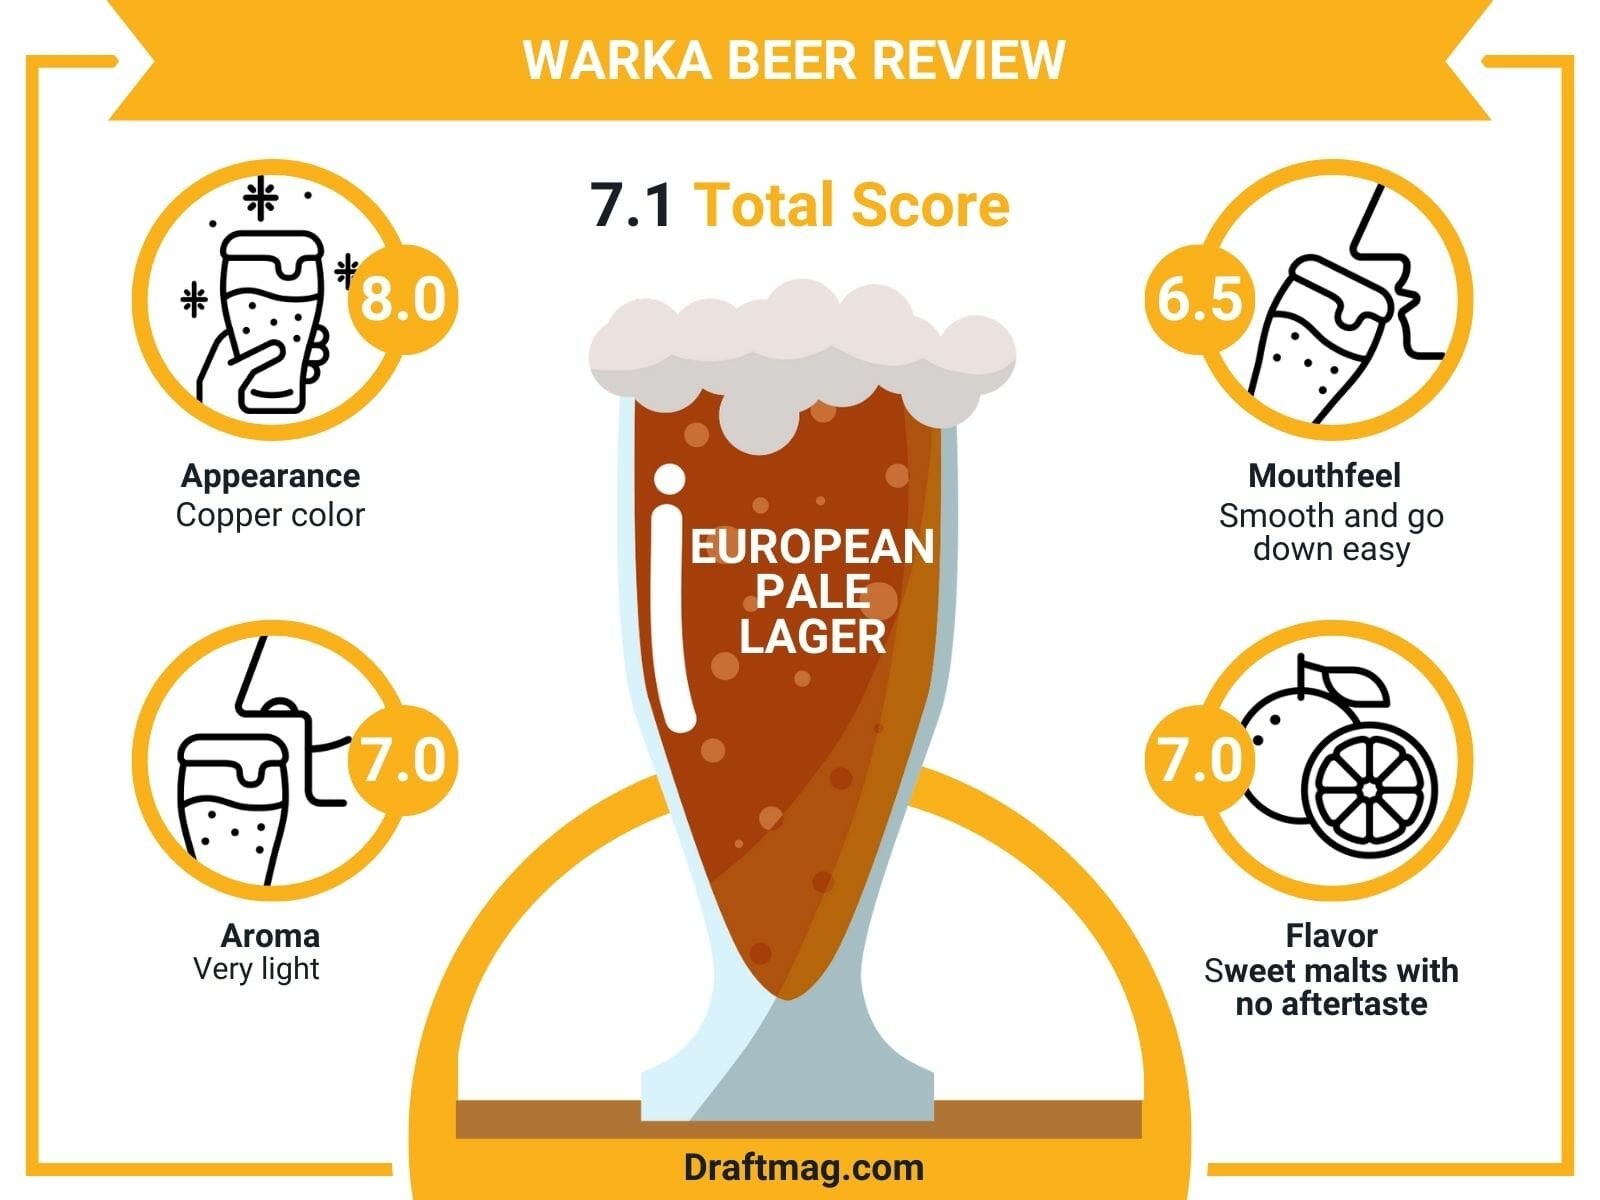 Warka Beer Review Infographic